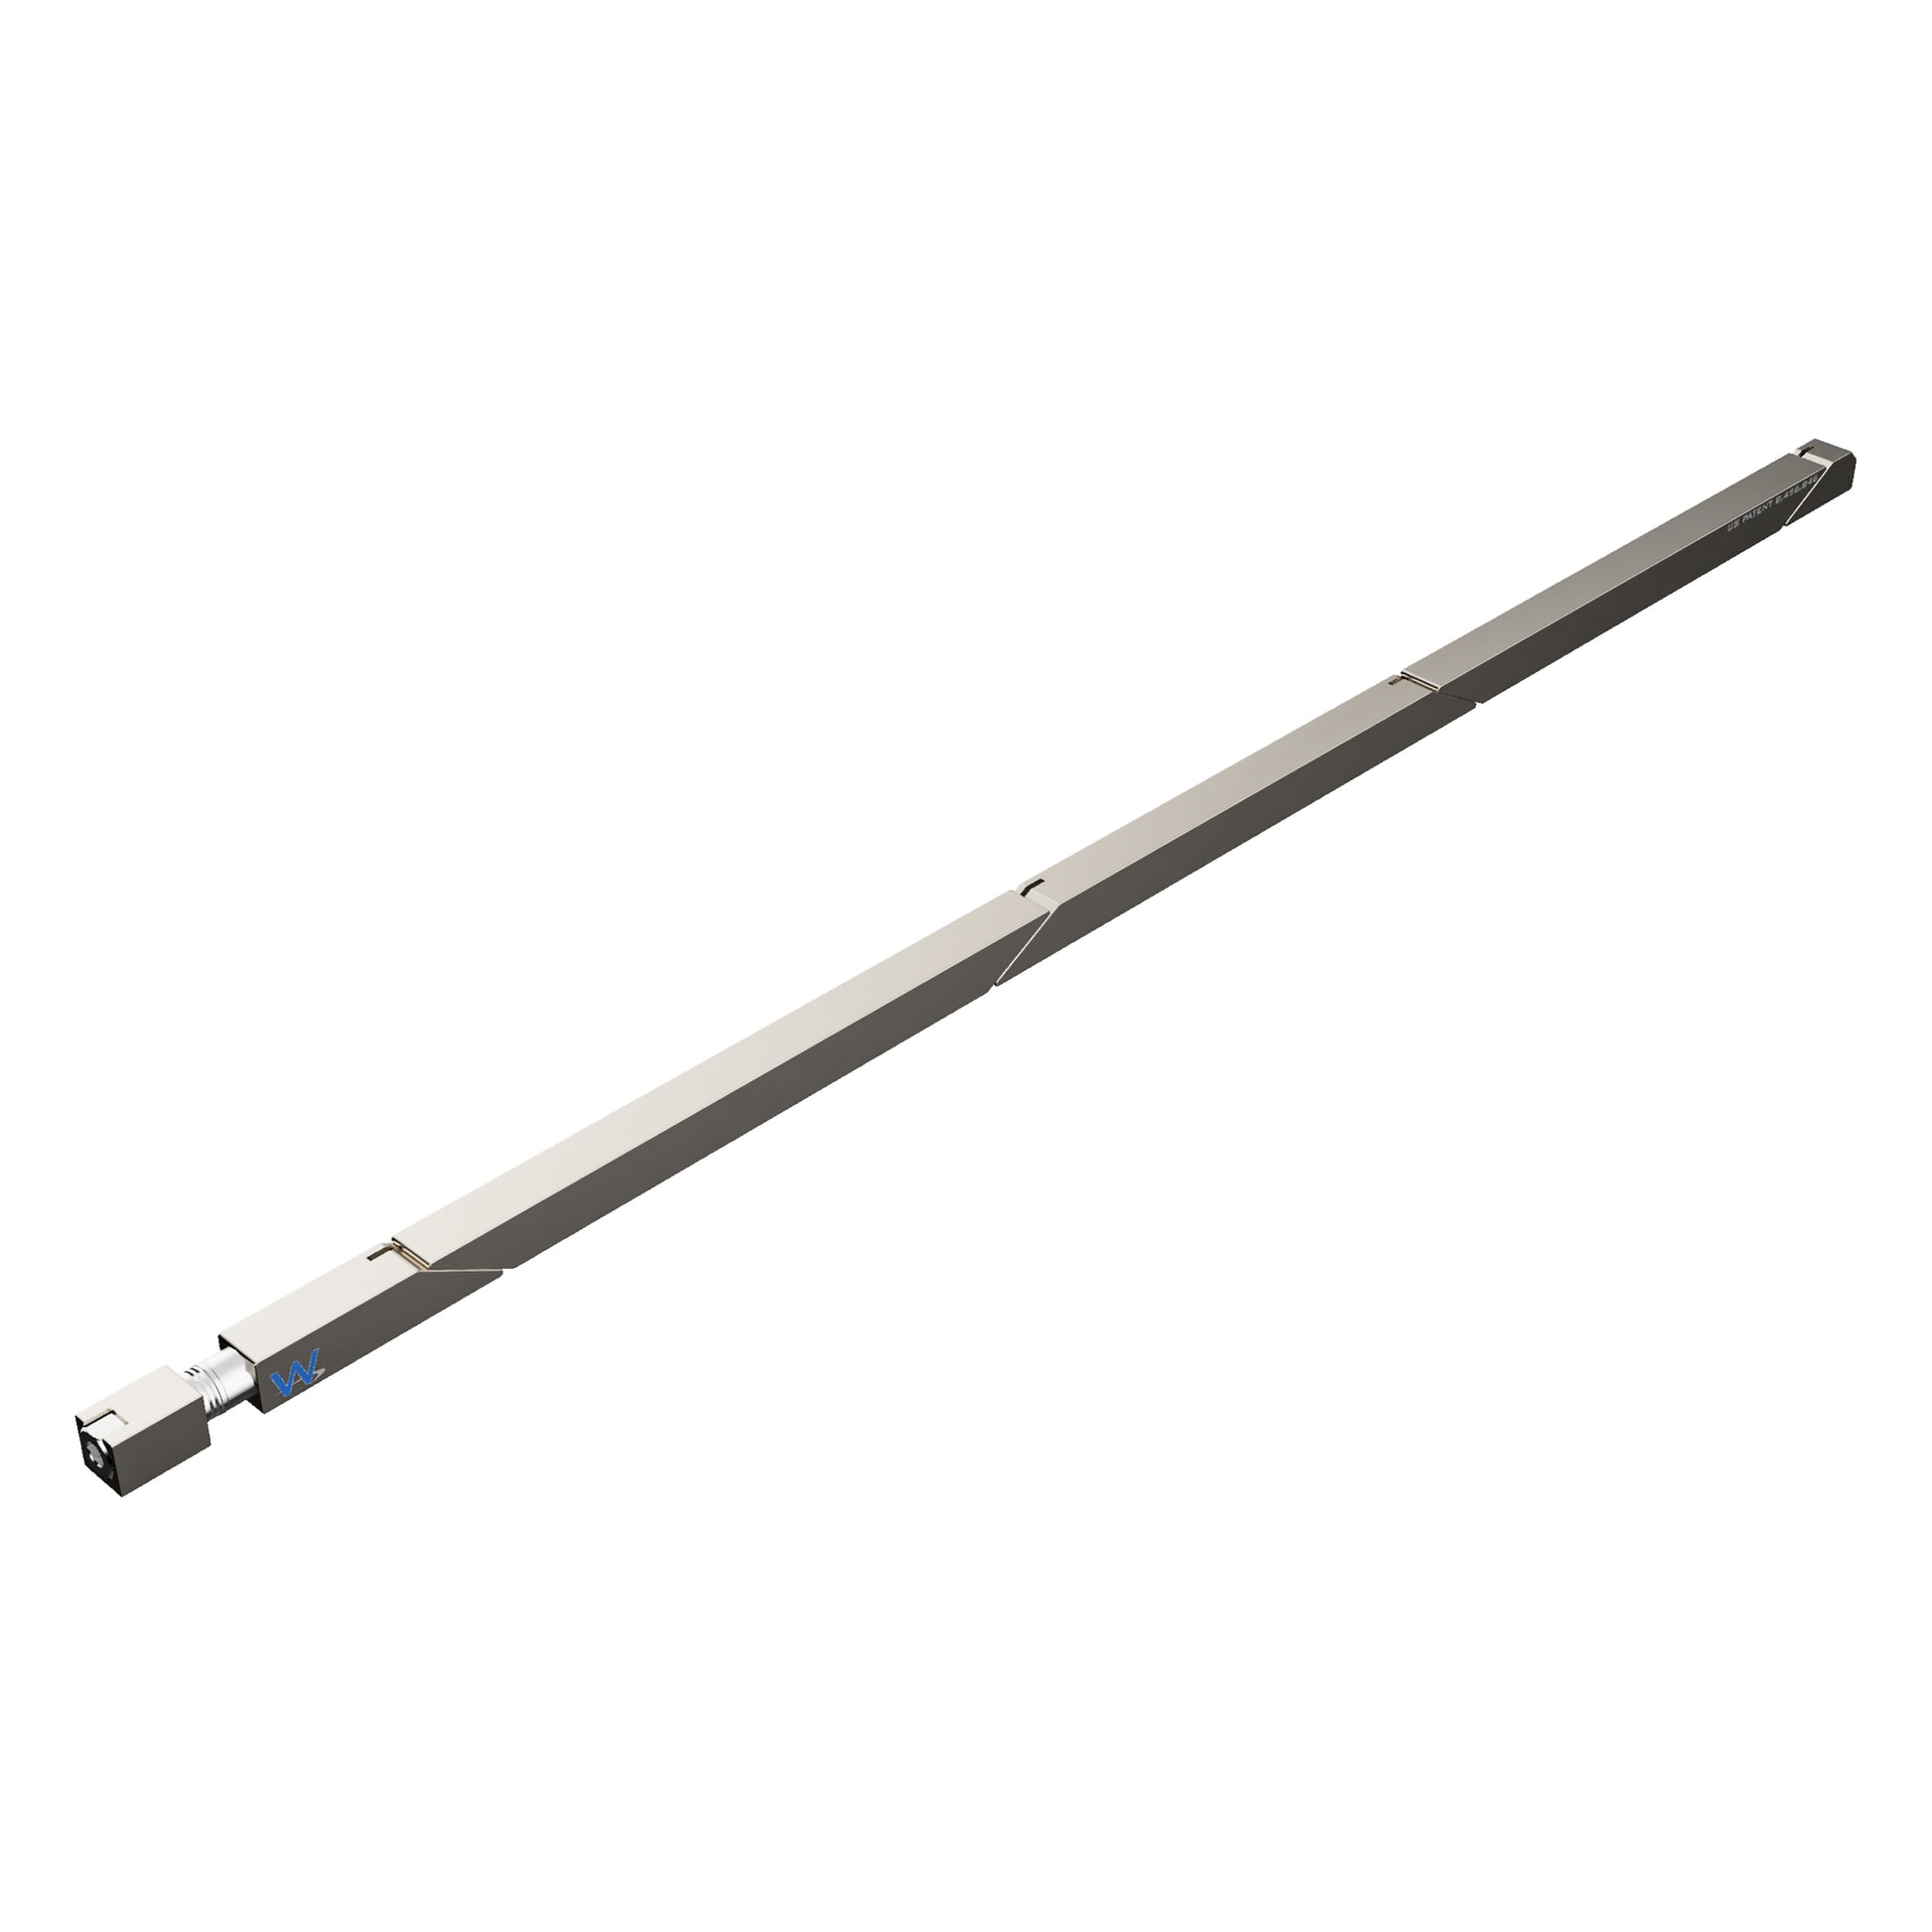 SW5-115-270-250 Max Force Belleville Wedgelock, segmented long rectulangular hardware component, Electroless Nickel Plated